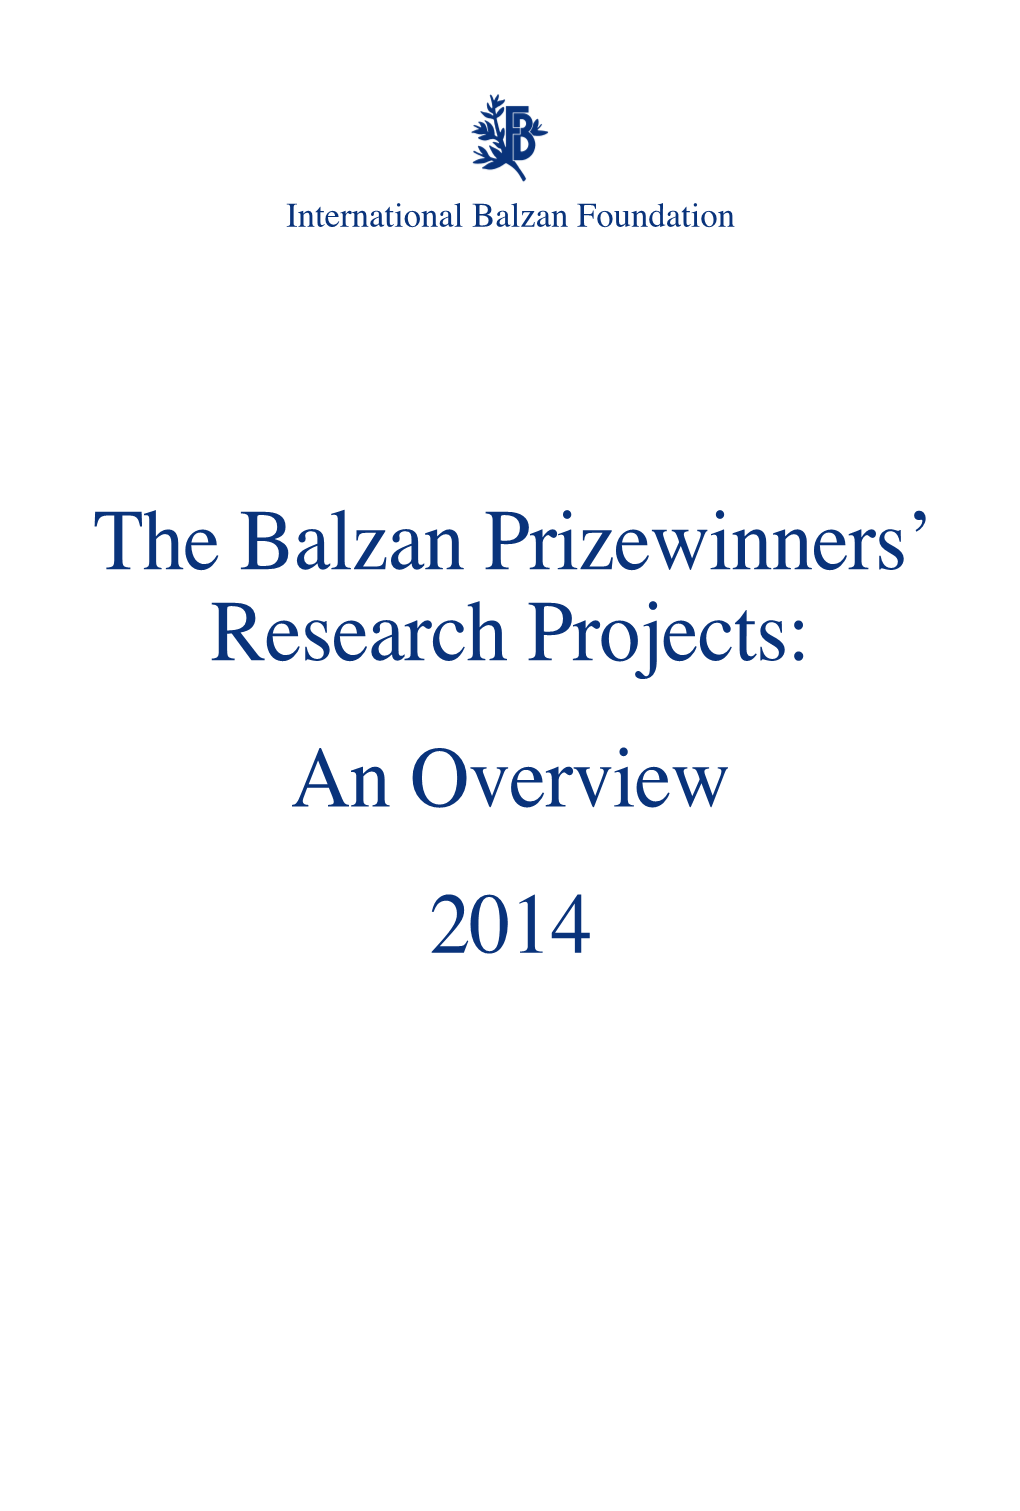 The Balzan Prizewinners' Research Projects: an Overview 2014